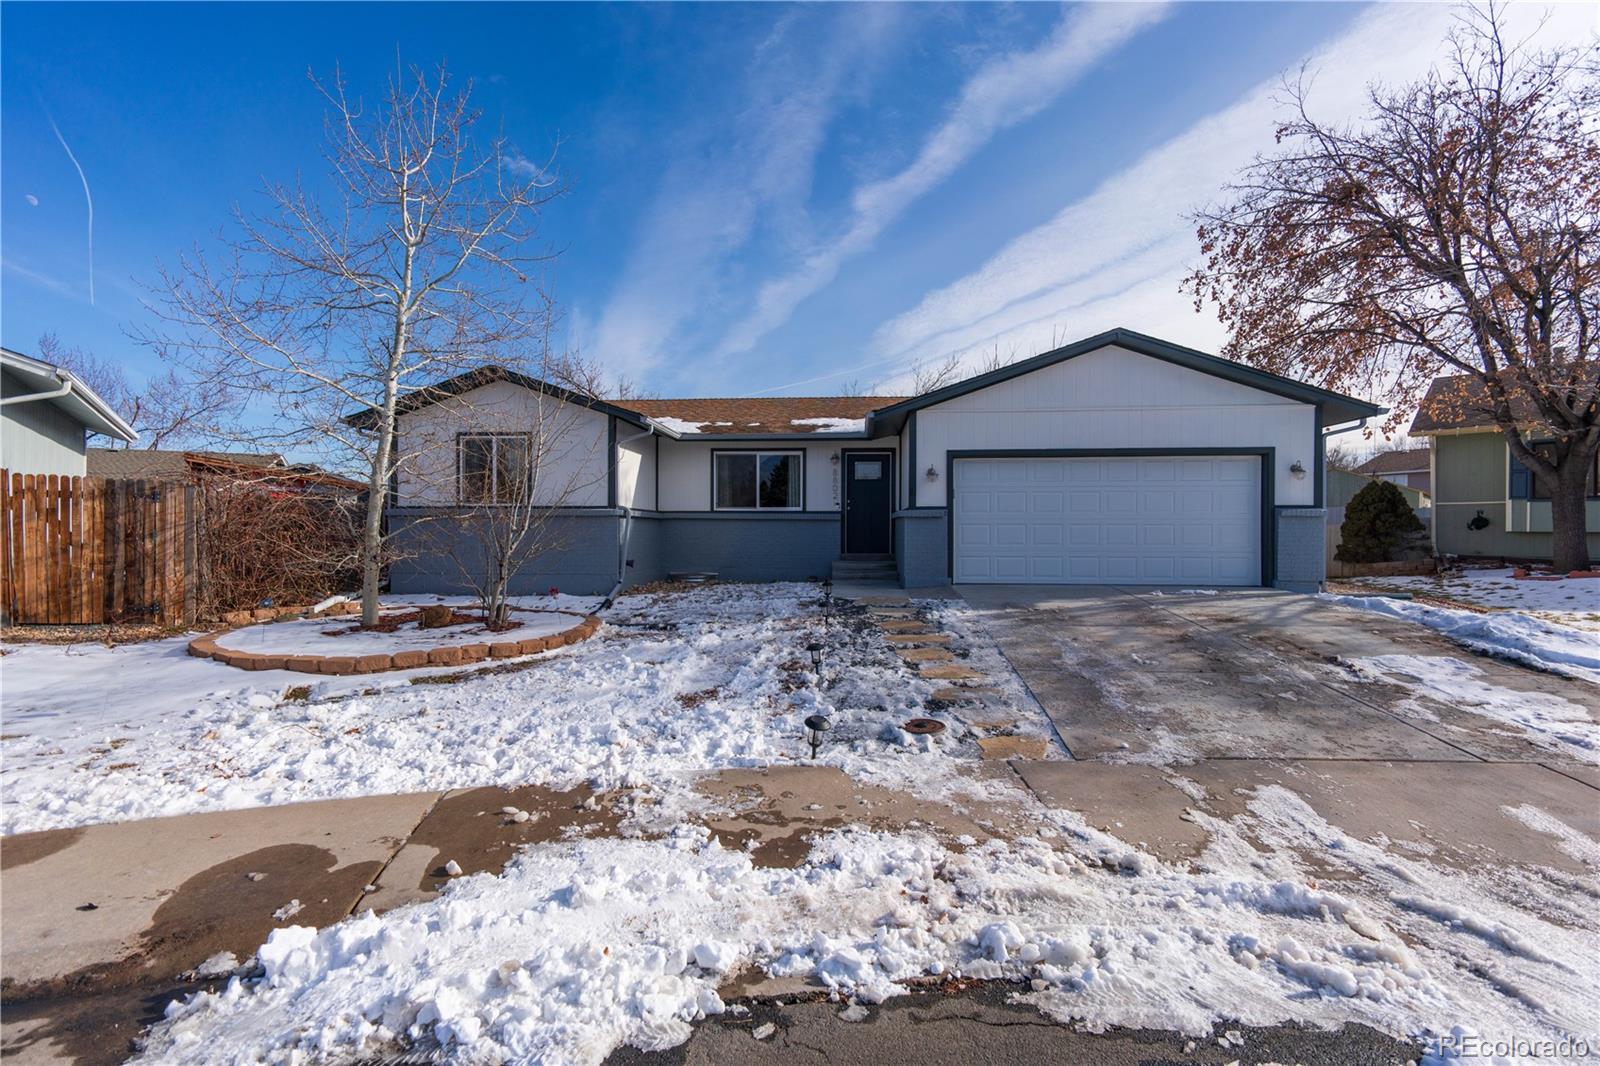 8802 w 86th avenue, Arvada sold home. Closed on 2024-03-29 for $589,999.